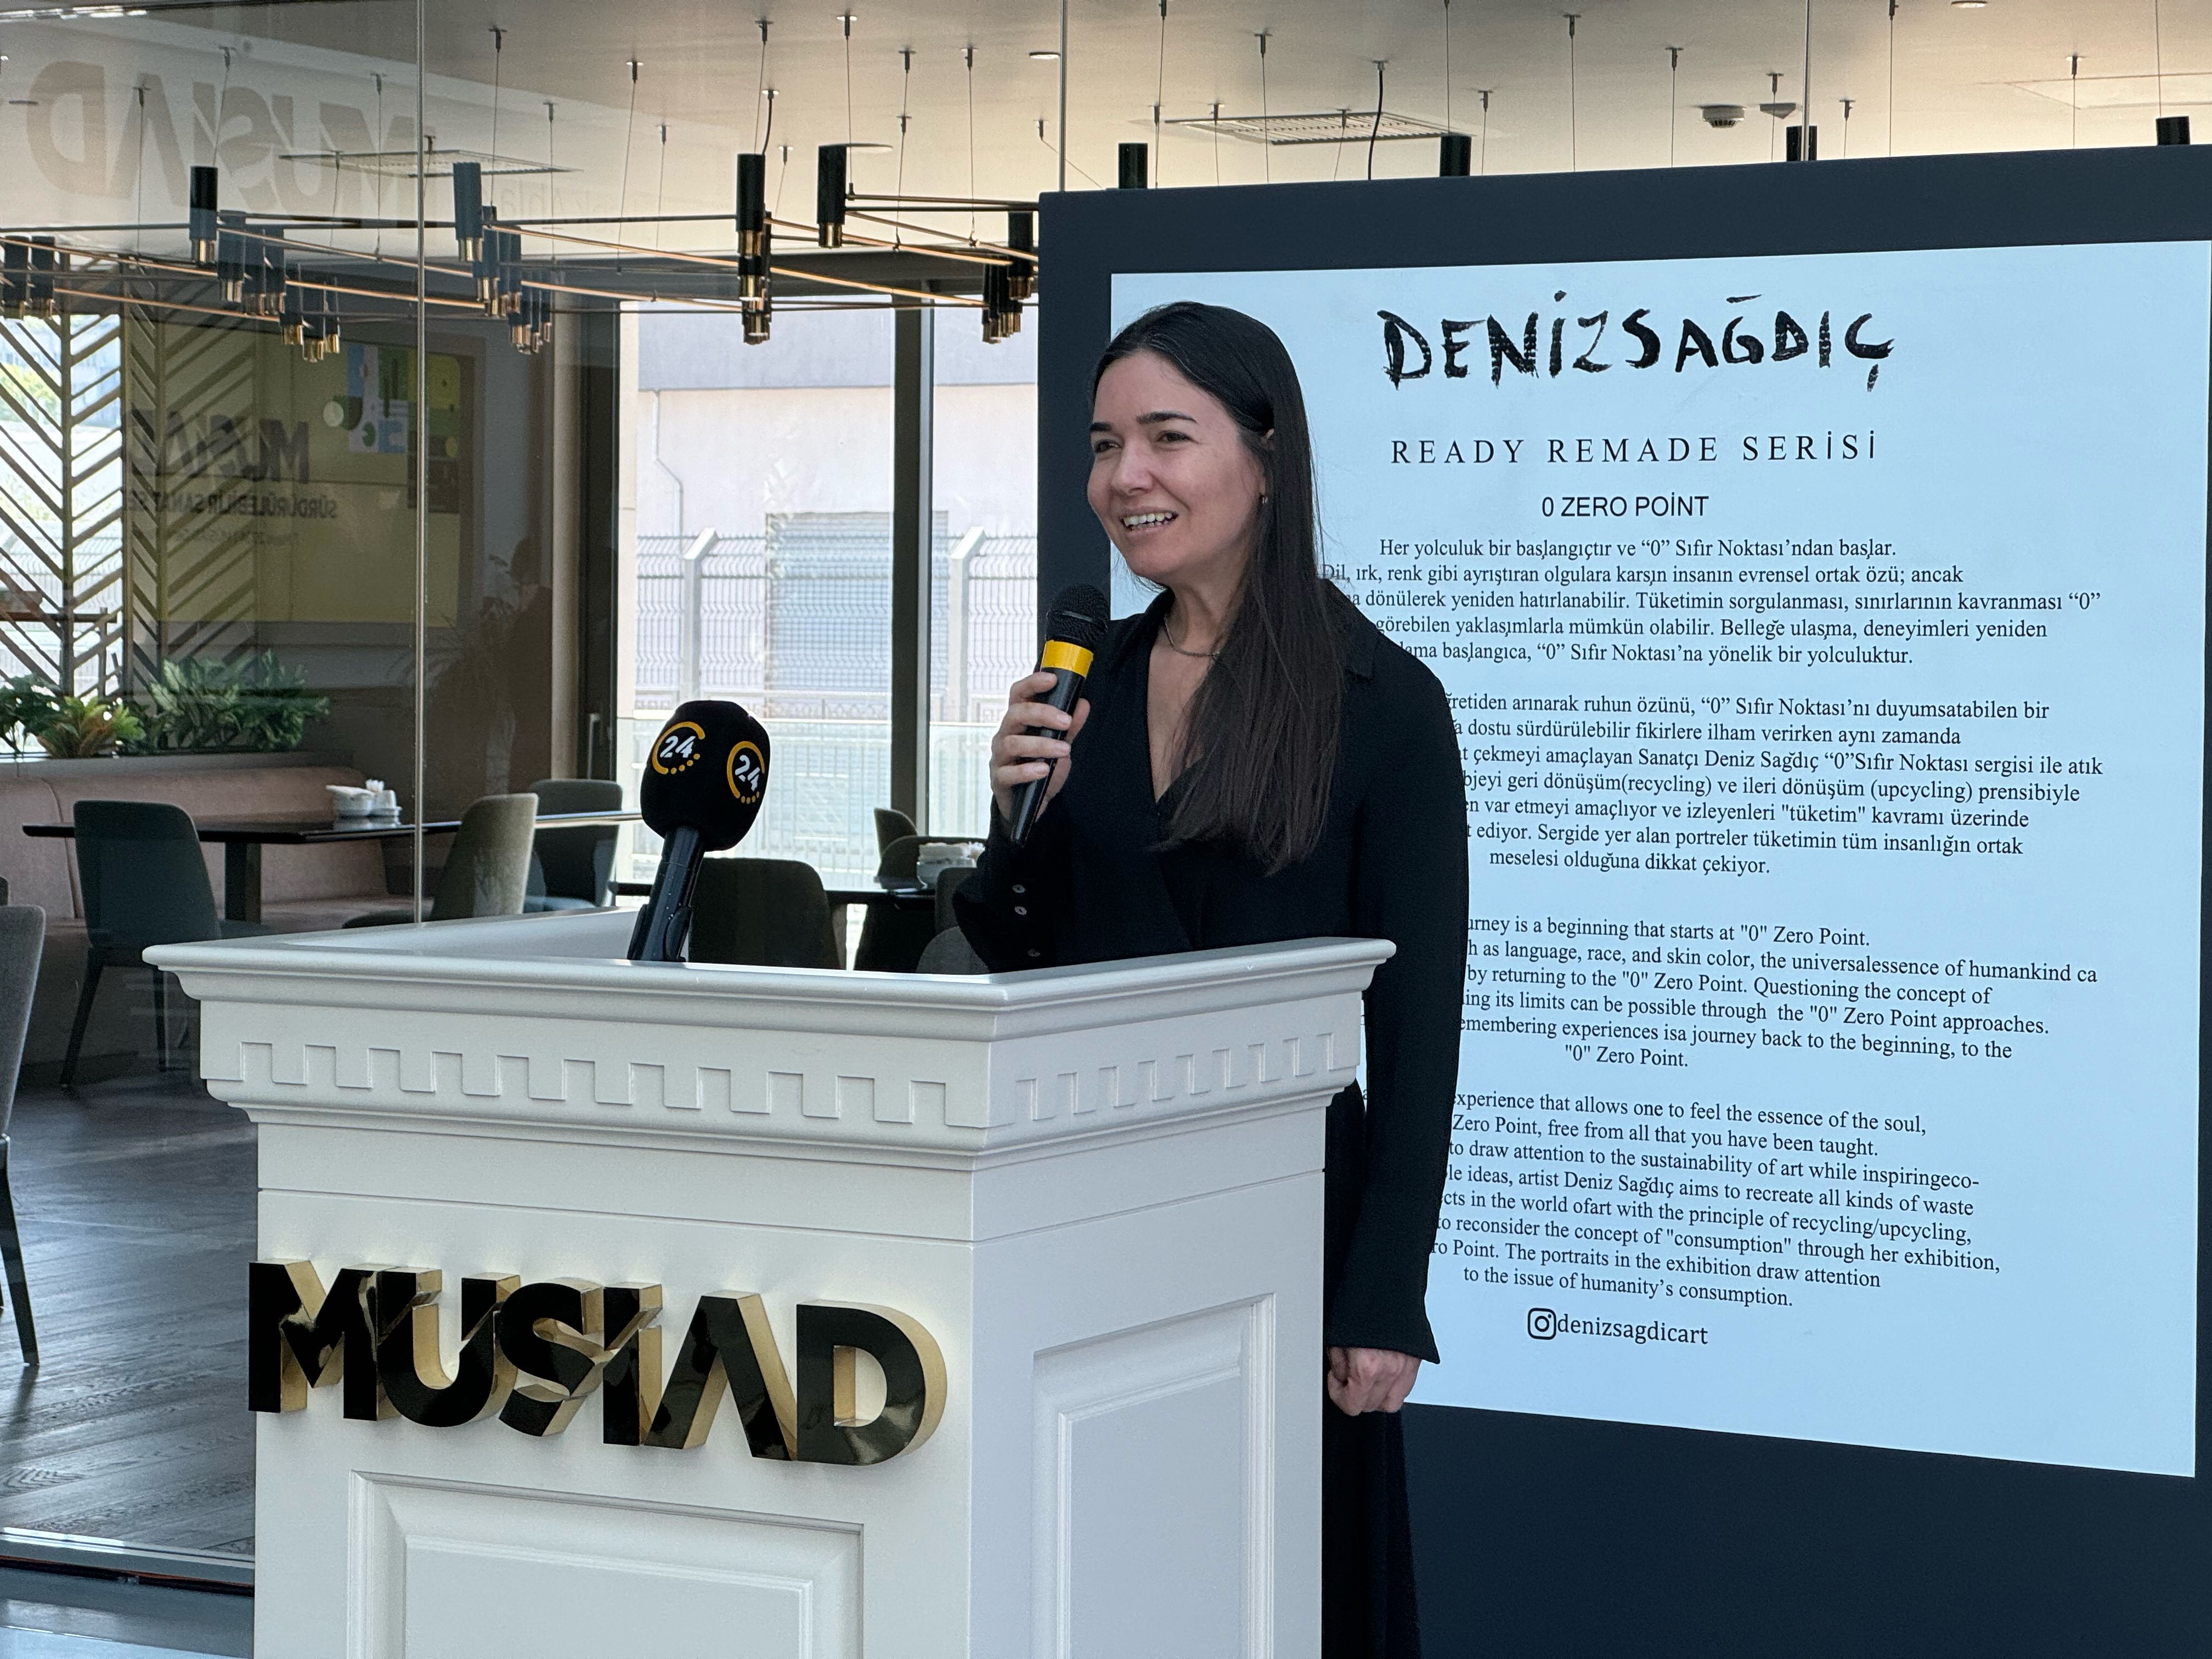 Deniz Sagdic's 'Sustainable Art' exhibition opens at MUSIAD